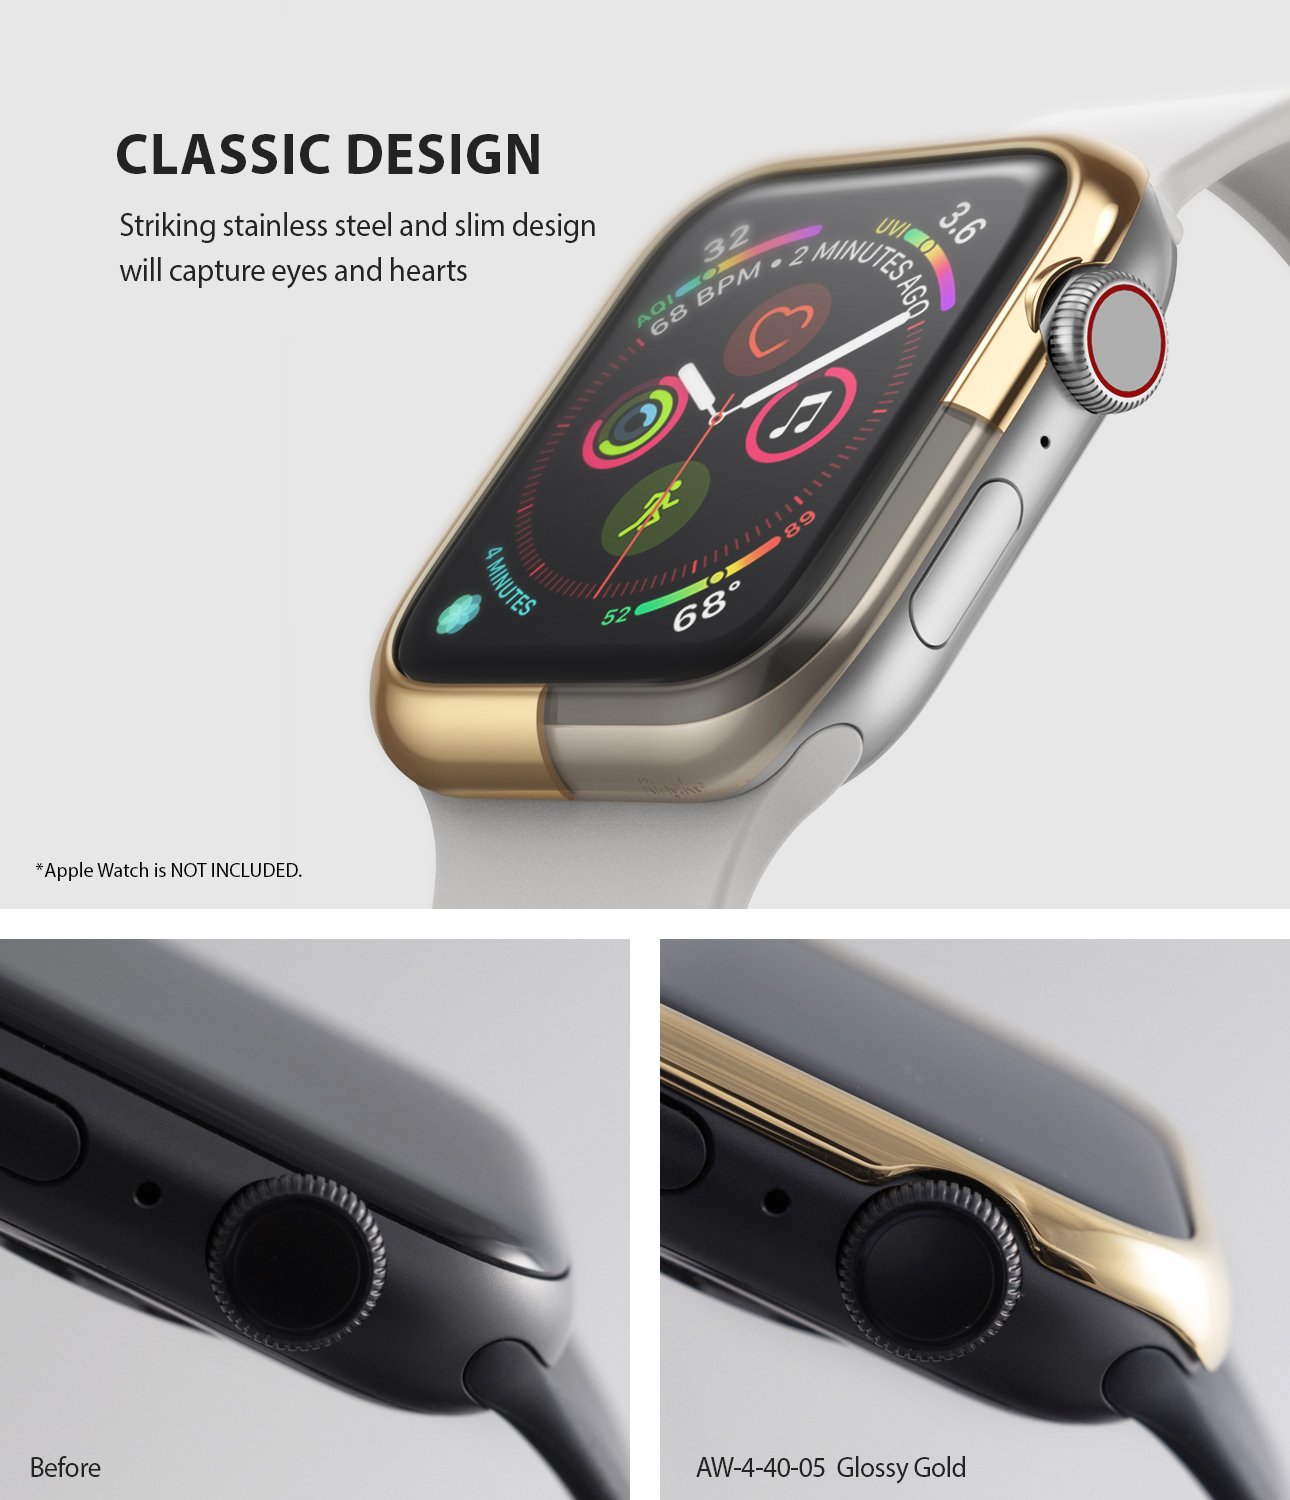 ringke bezel styling 40-05 glossy gold stainless steel on apple watch series 6 / 5 / 4 / SE 40mm classic design